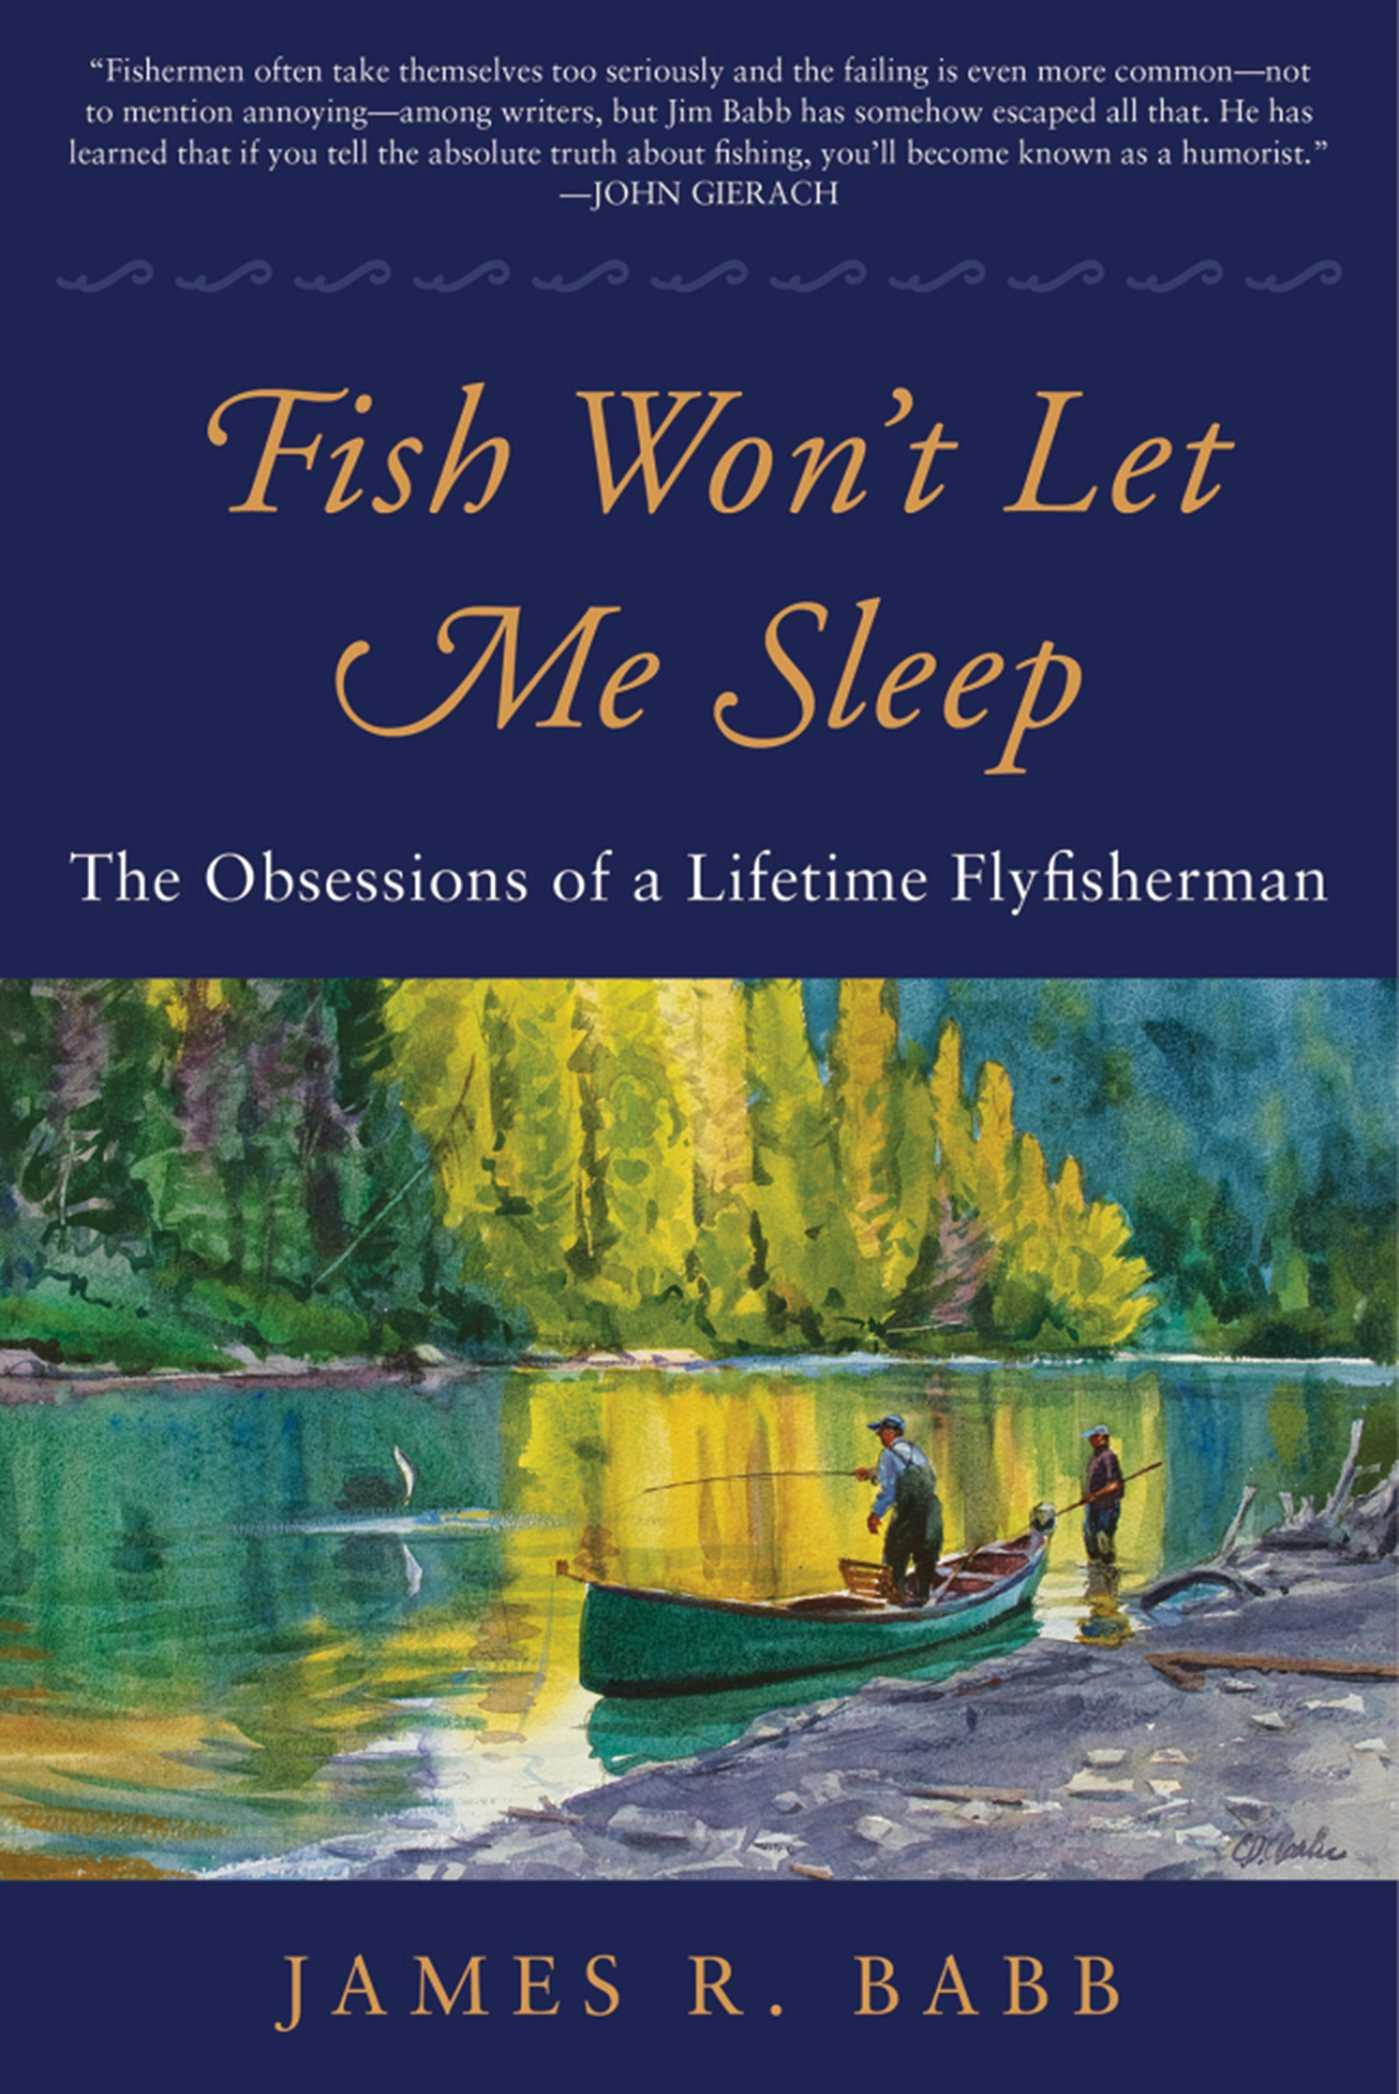 Fish Won't Let Me Sleep: The Obsessions of a Lifetime Flyfisherman - James R. Babb